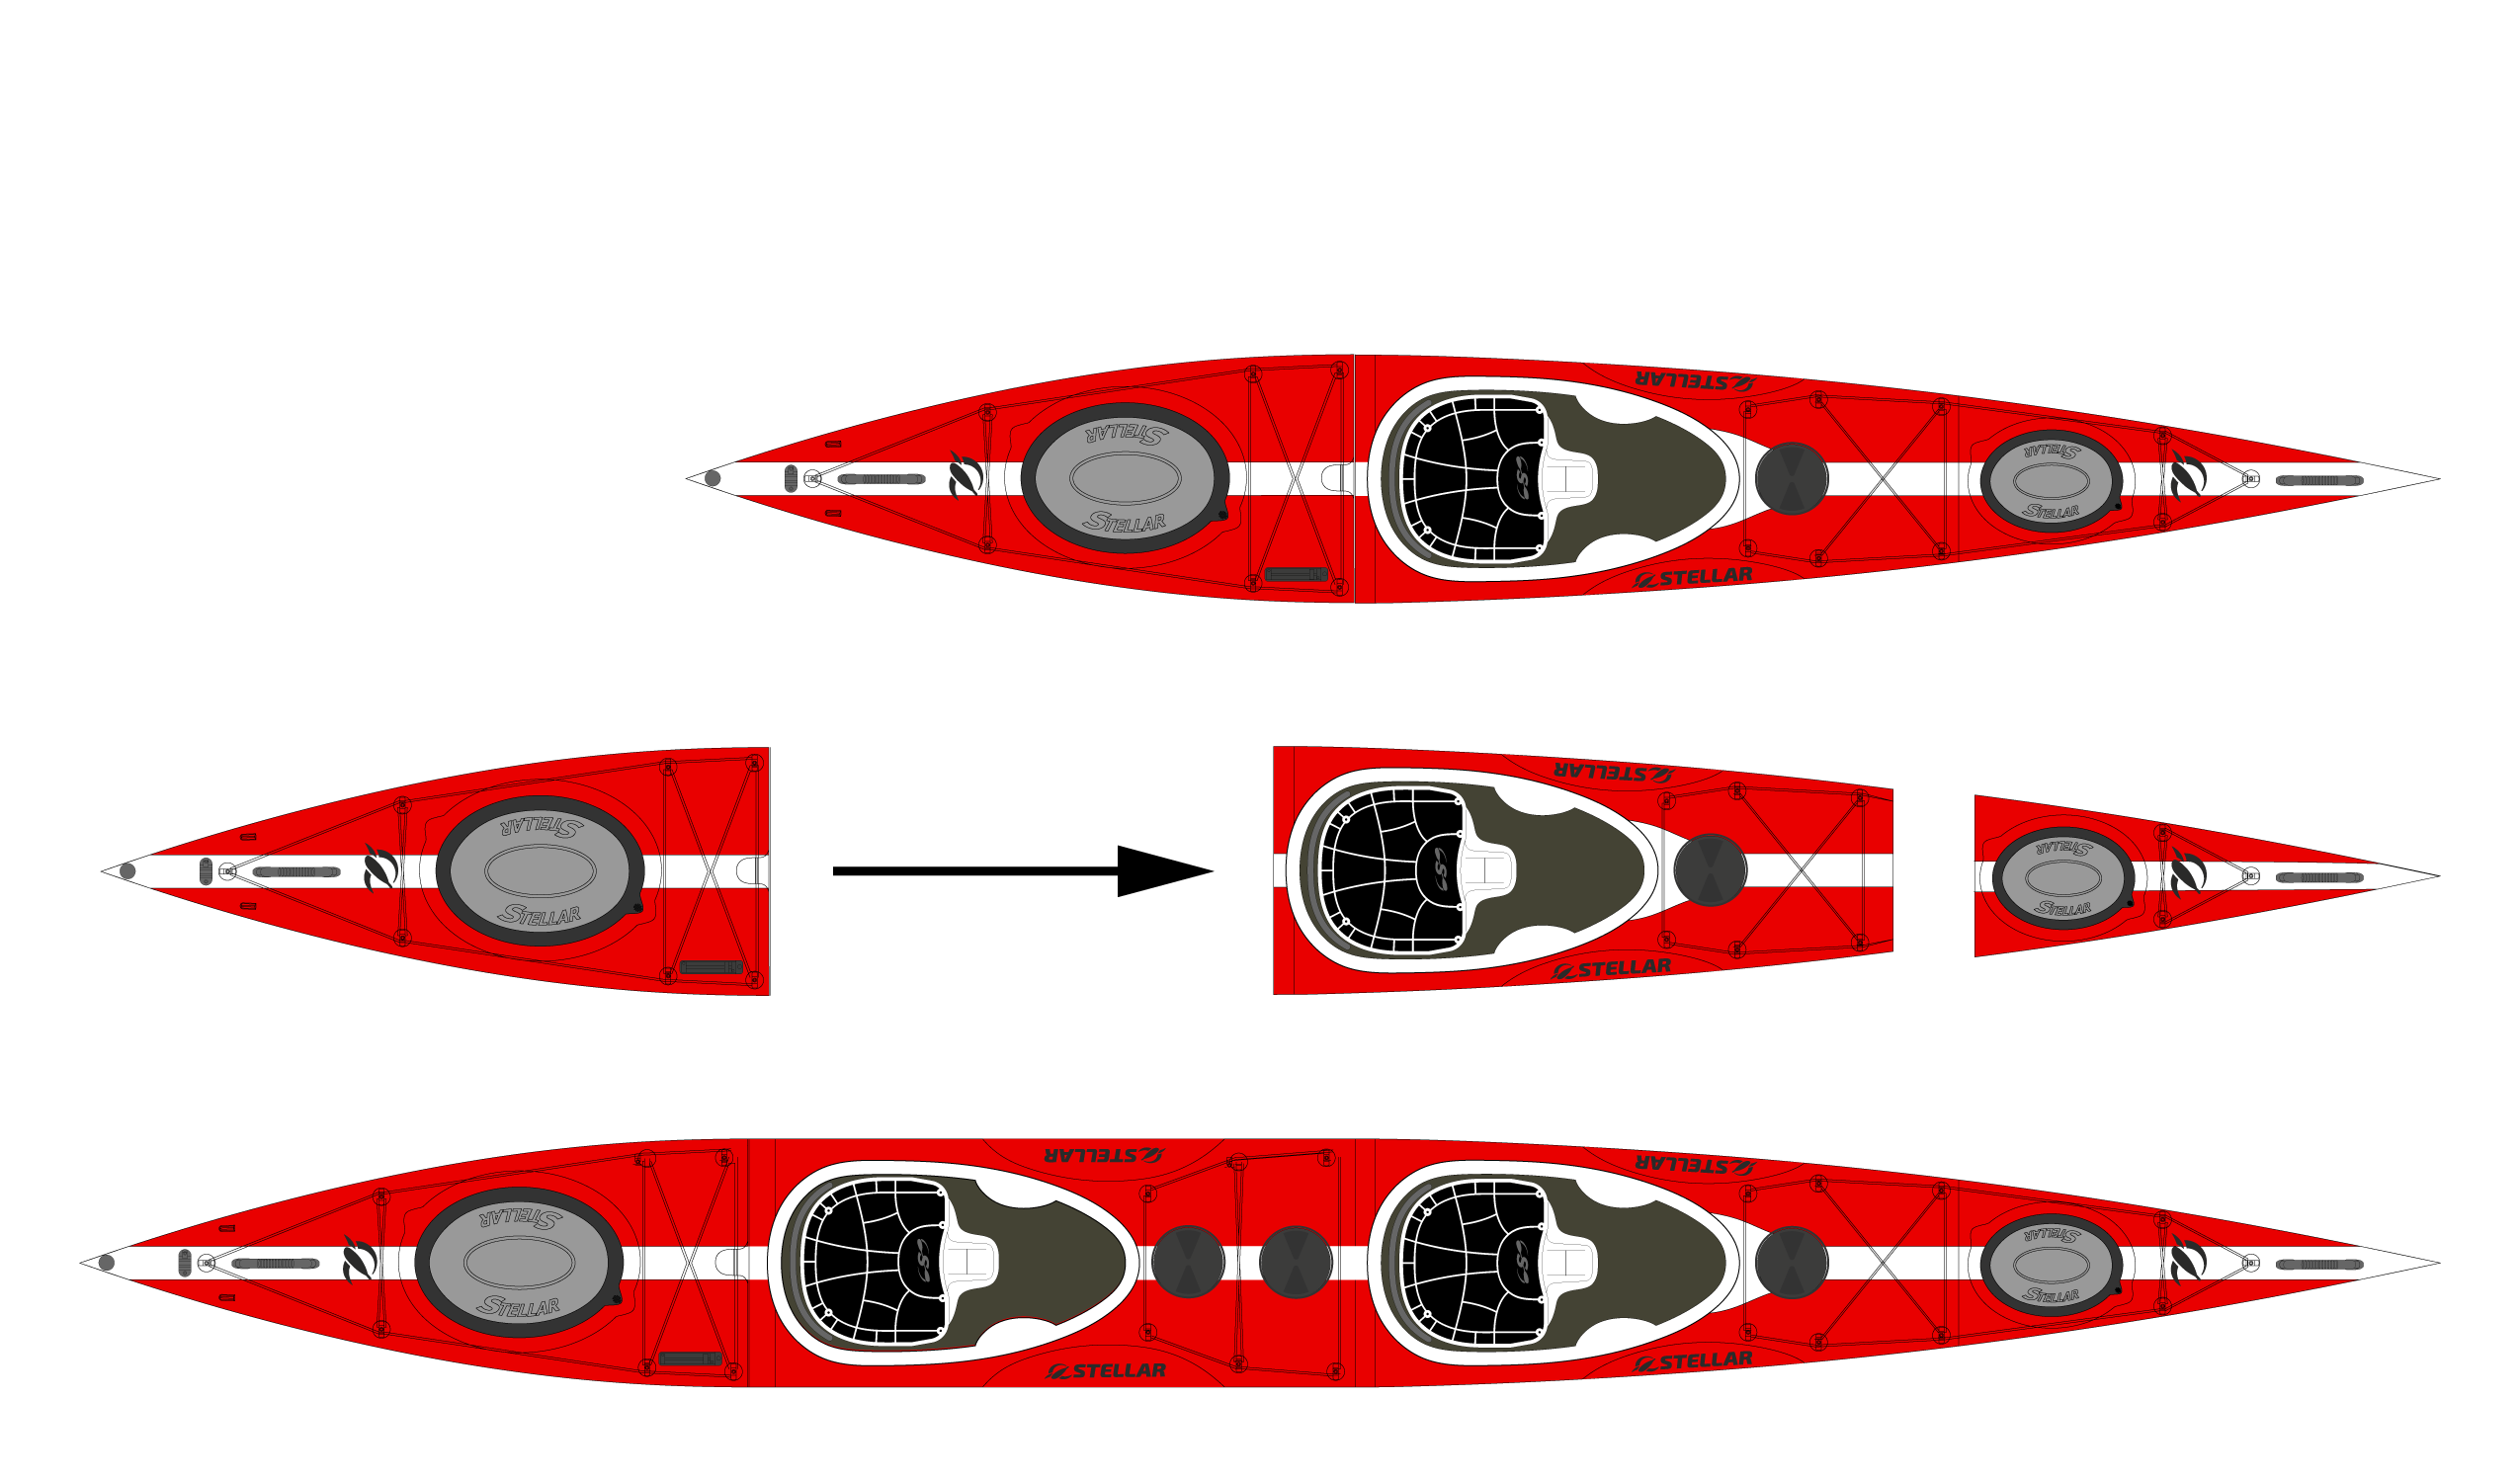 ST19 Mod divisible-tandem/solo-red white-+ carbon paddle